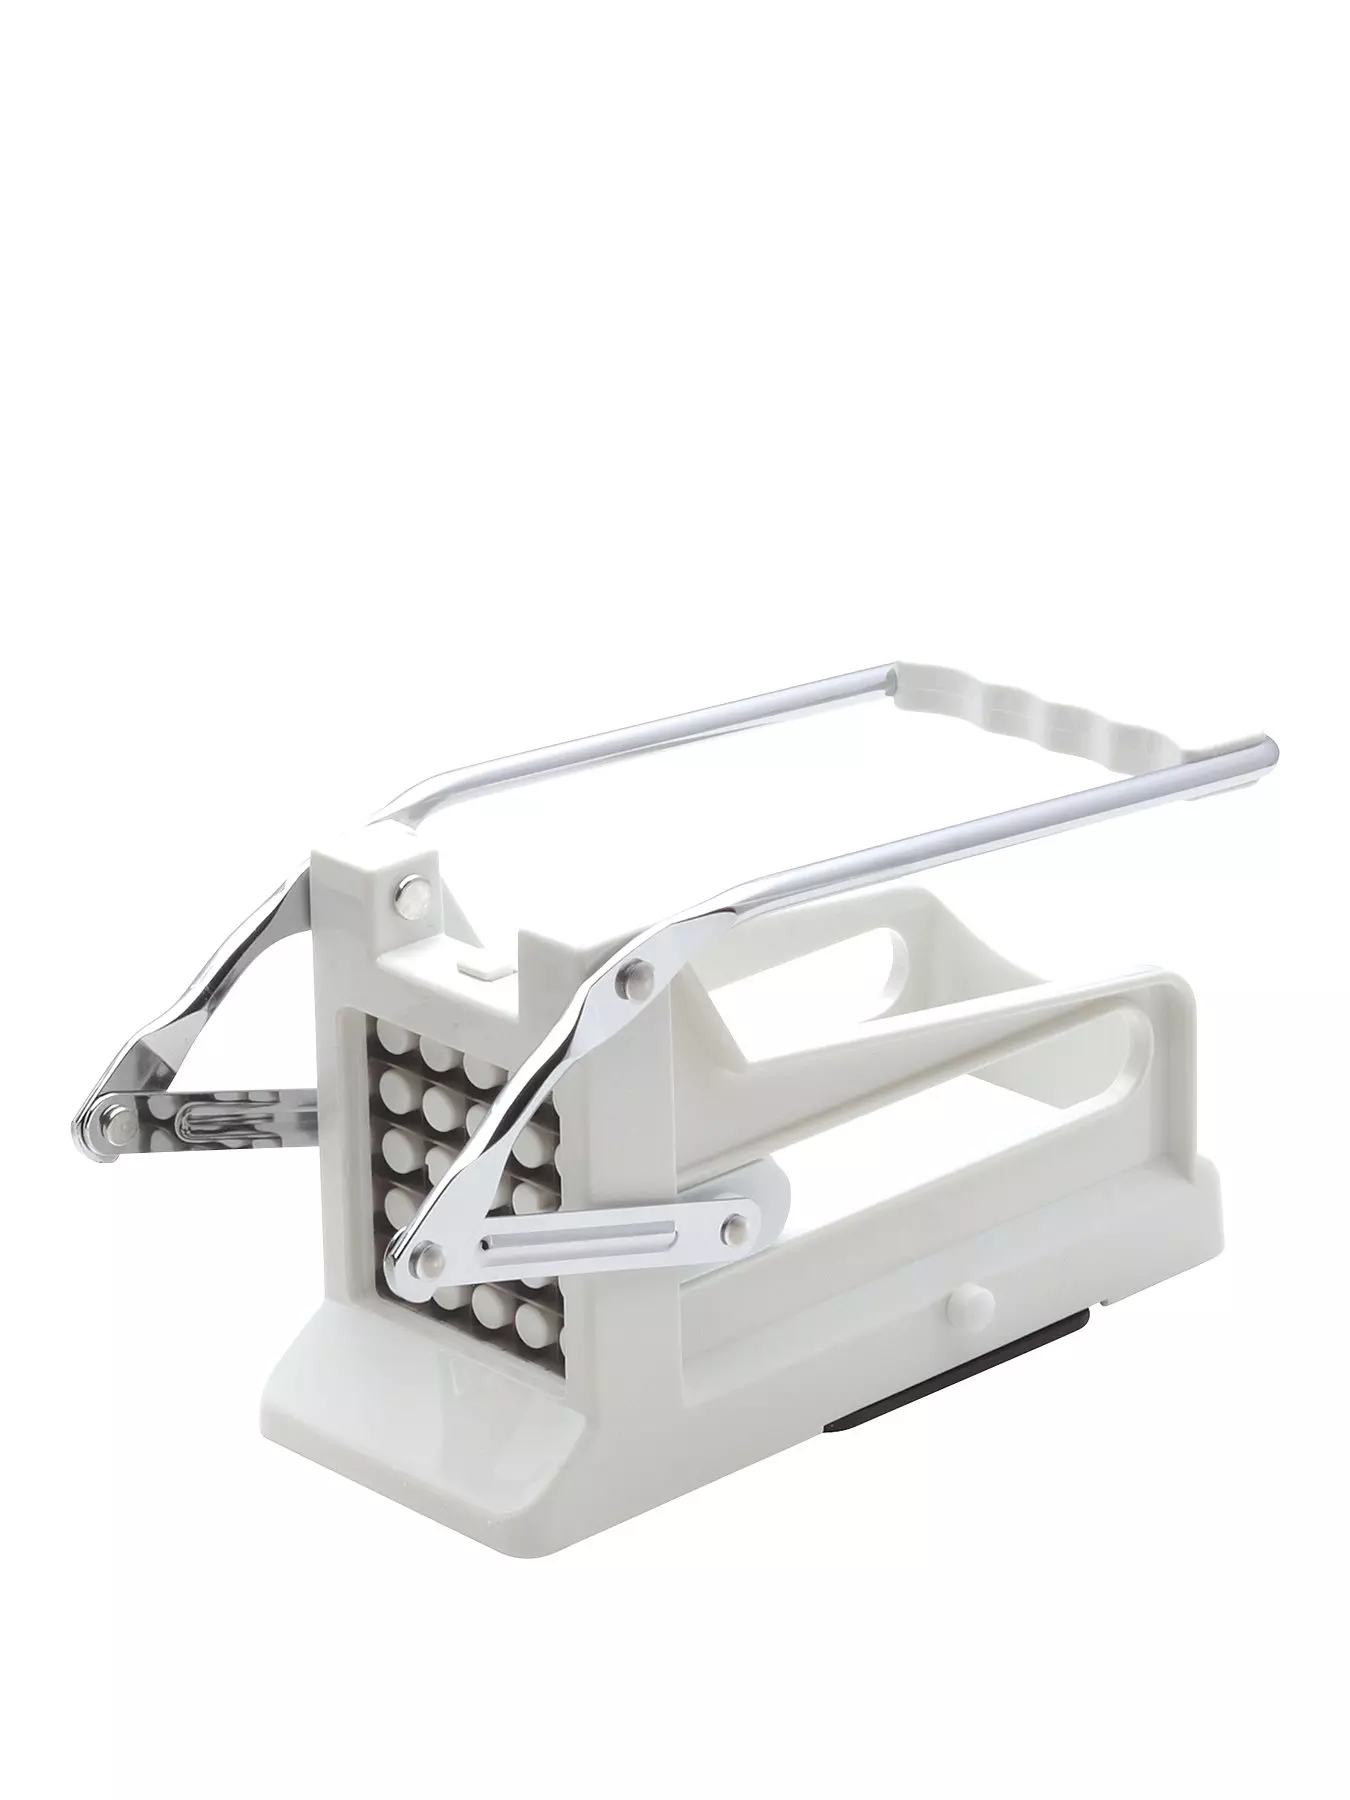 Stainless Steel Potato Chipper Fast Cutting Potato Chip Cutter with 36/46  Holes Blades Multifunction Vegetable Fruit Chipper